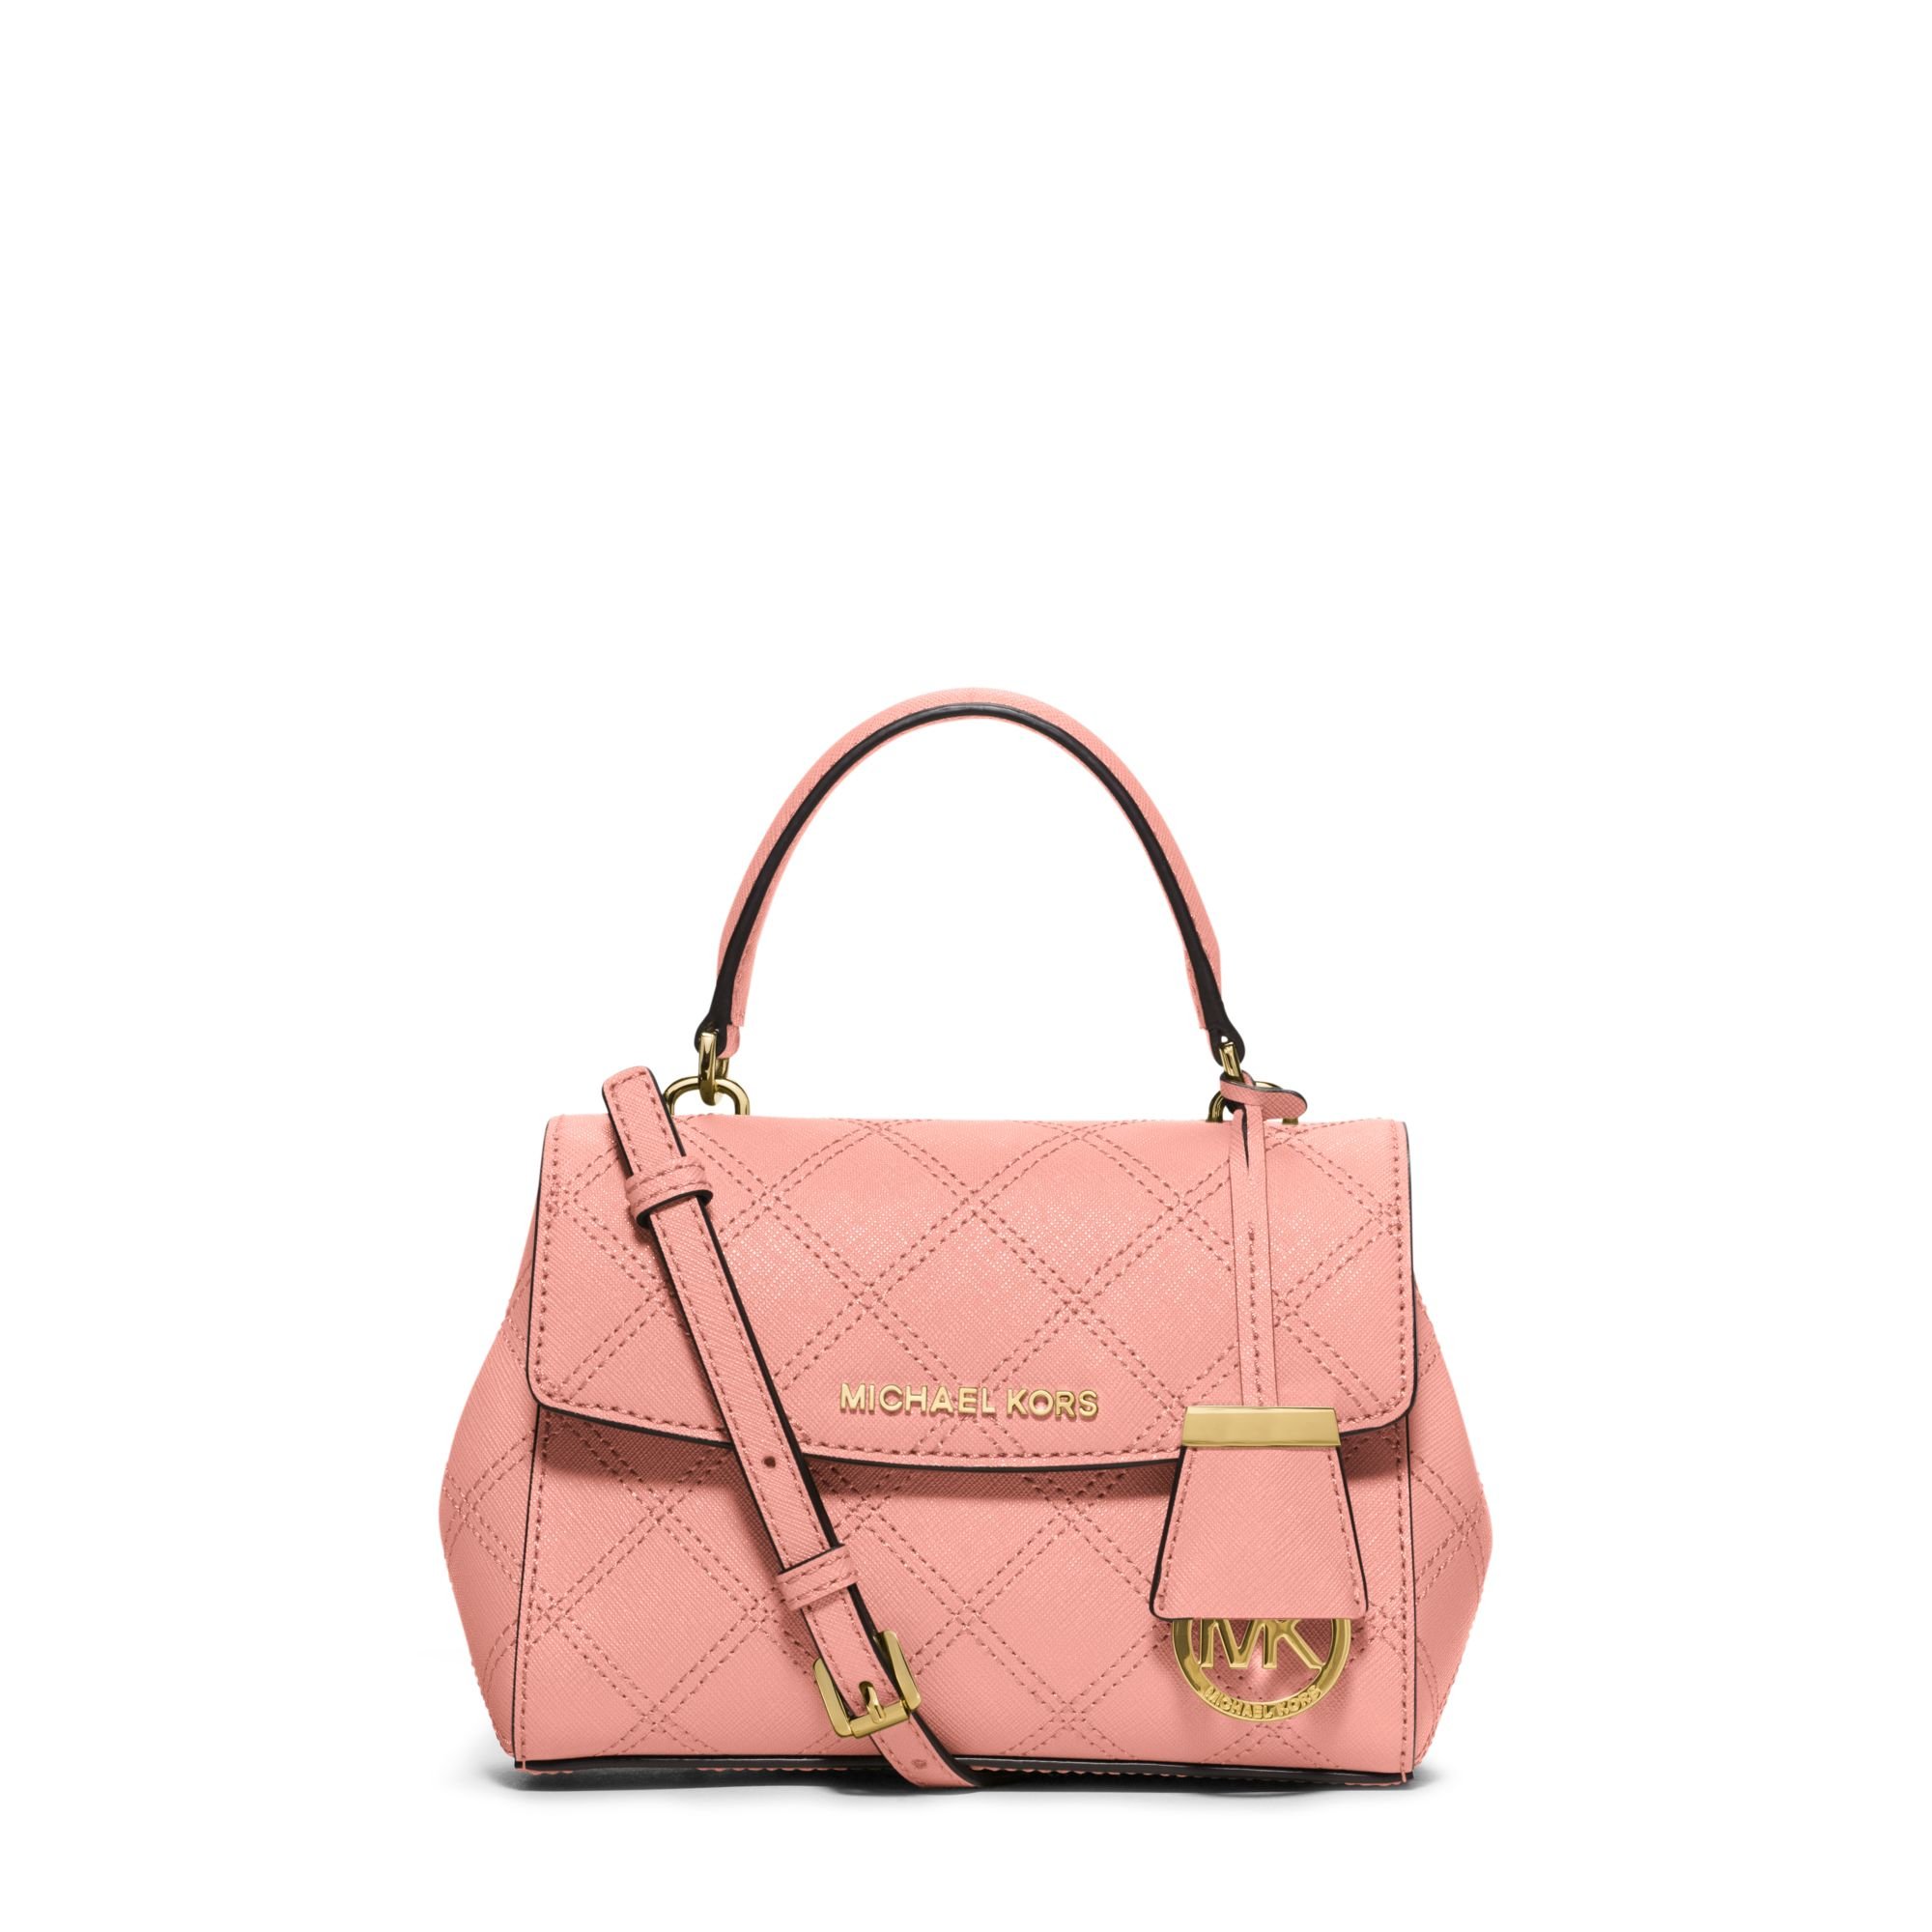 Michael Kors Ava Extra-small Saffiano Leather Crossbody in Pink - Lyst